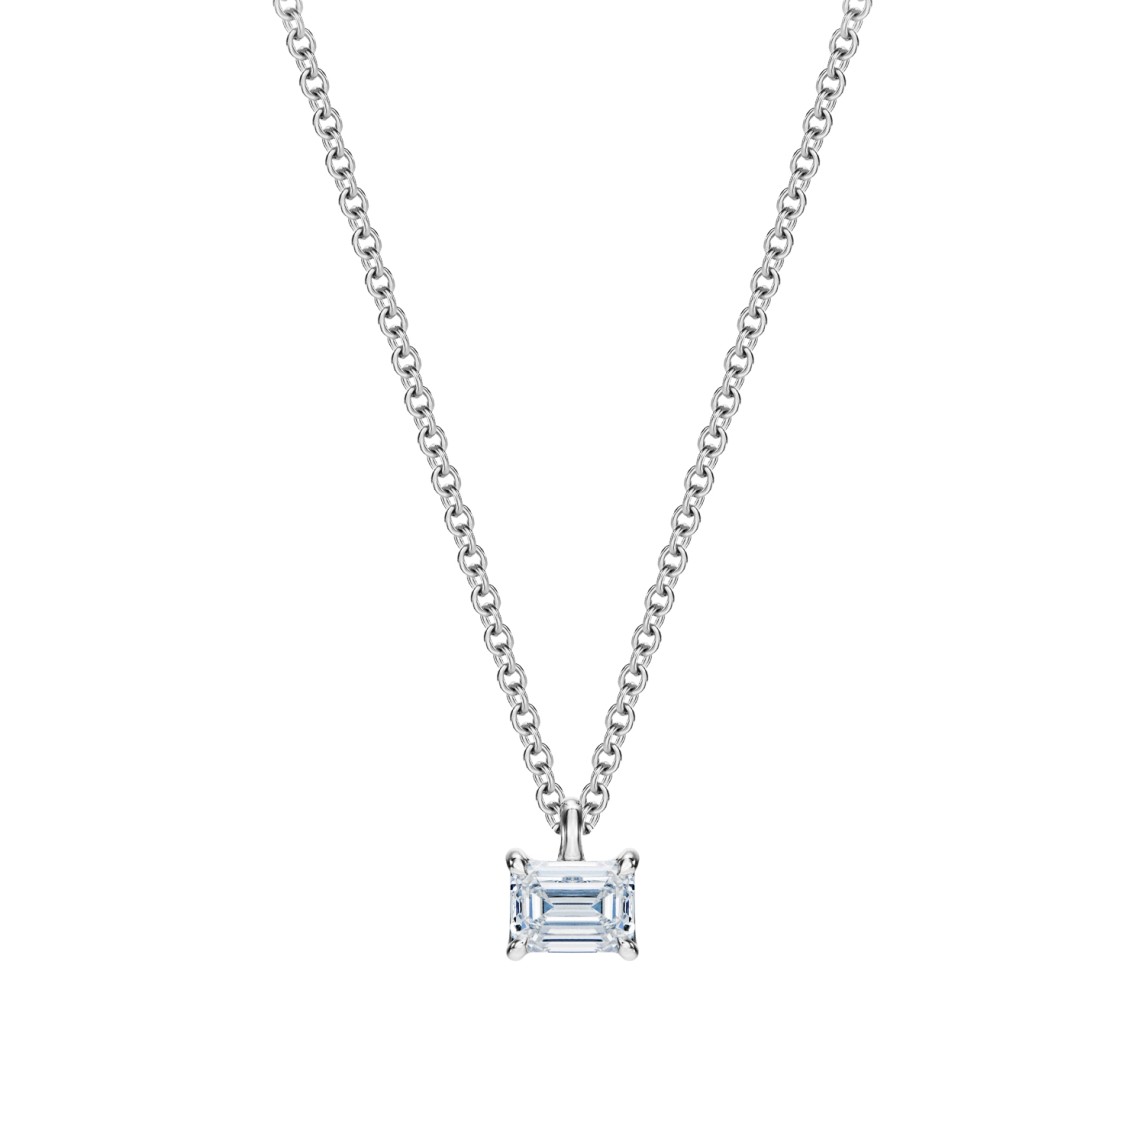 White Gold Necklace With Emerald-Cut Diamond